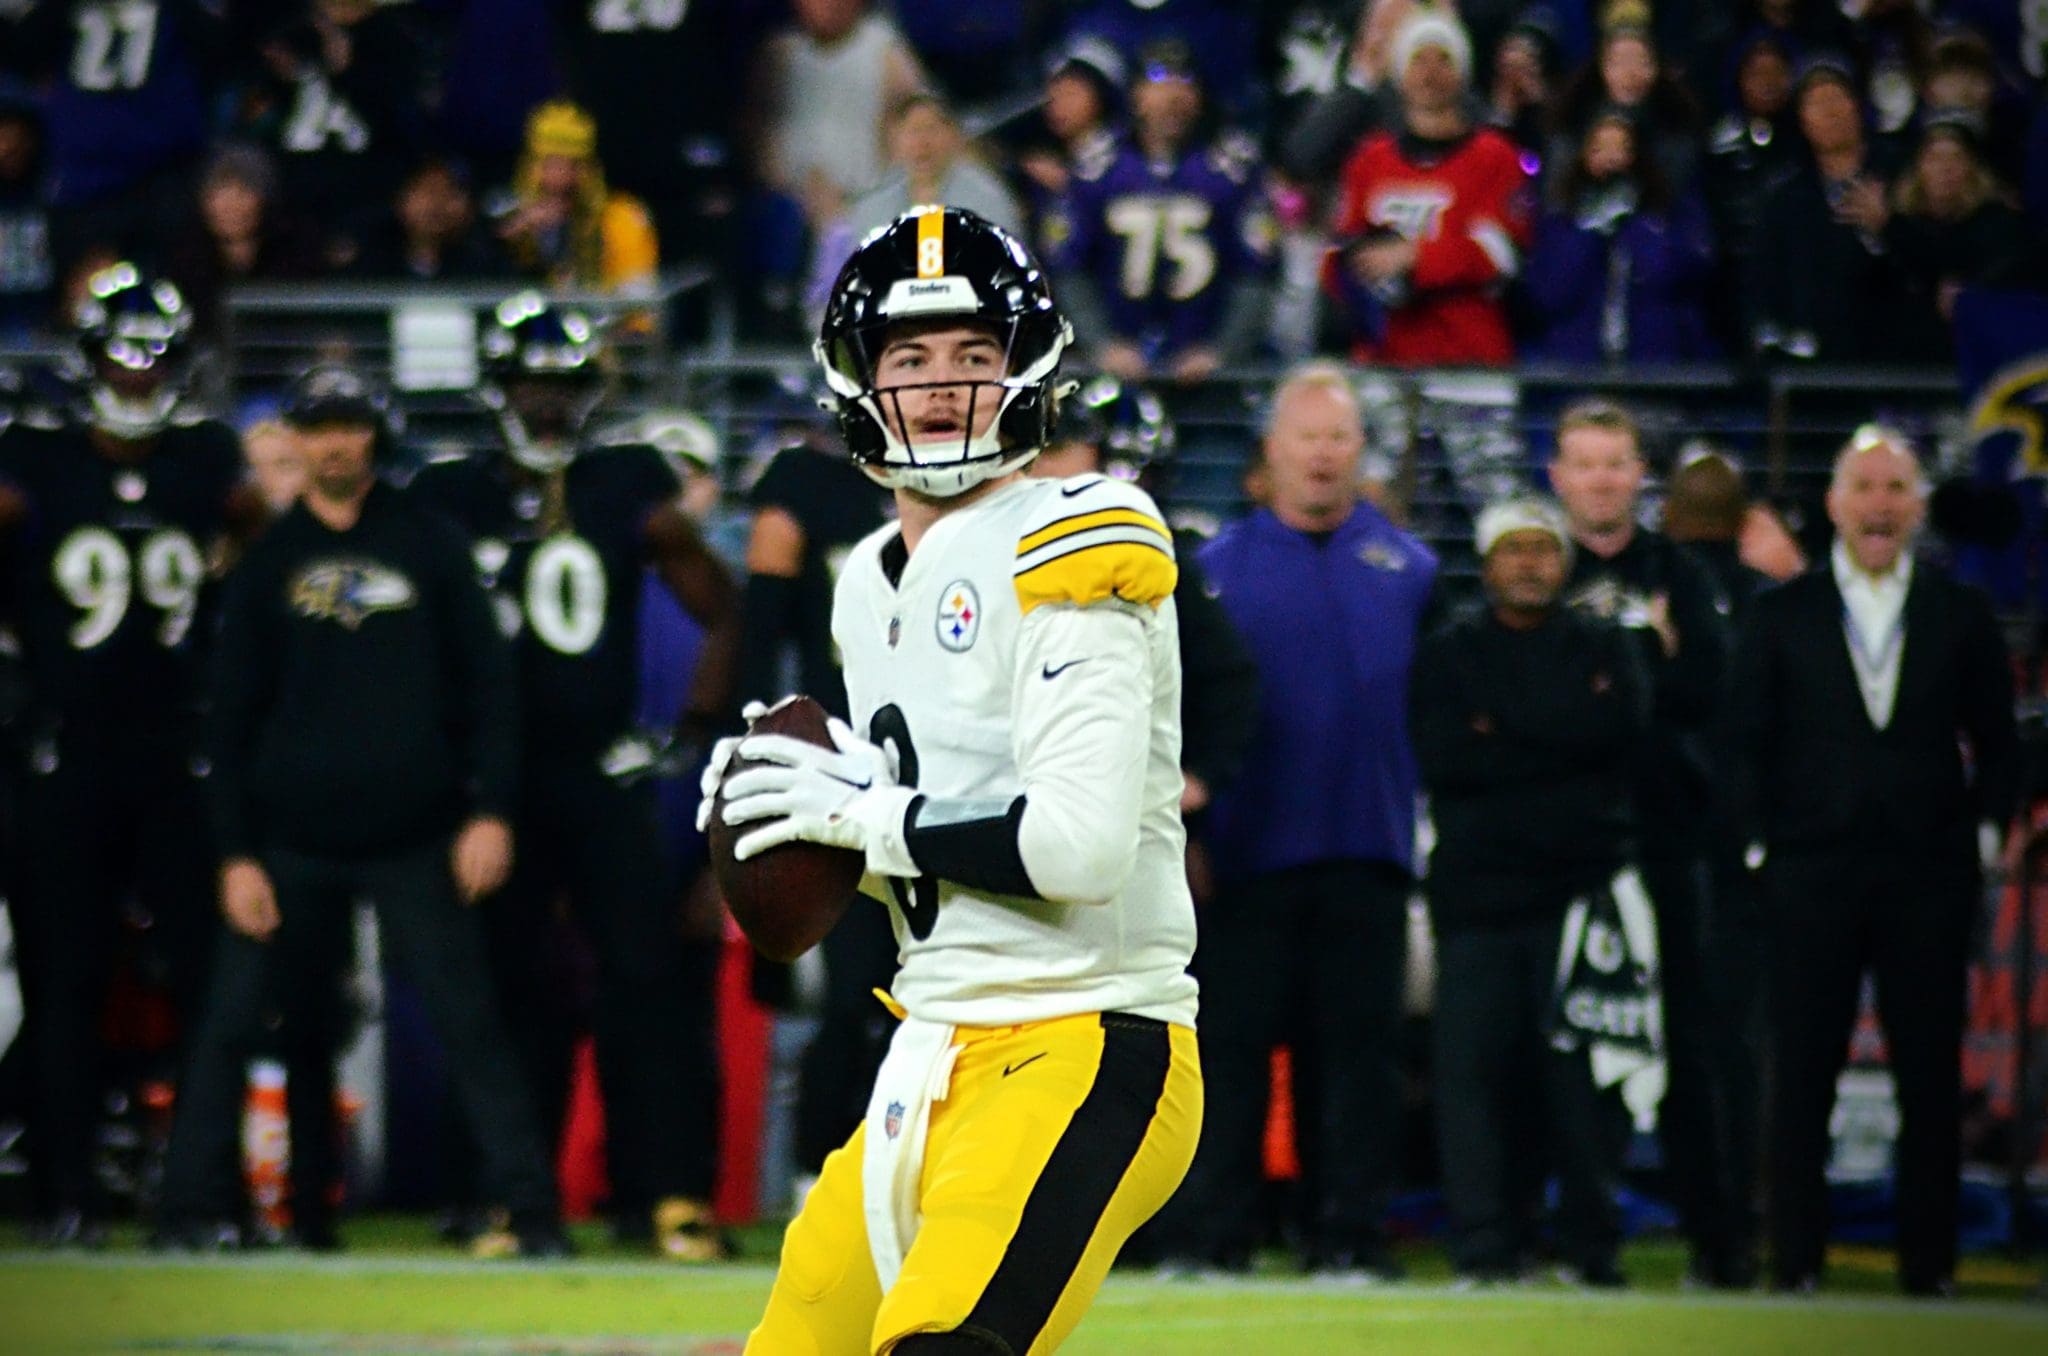 Kenny Pickett drops back to pass as the Steelers face the Ravens on Jan. 1, 2022 in Baltimore. (Mitchell Northam / Steelers Now)